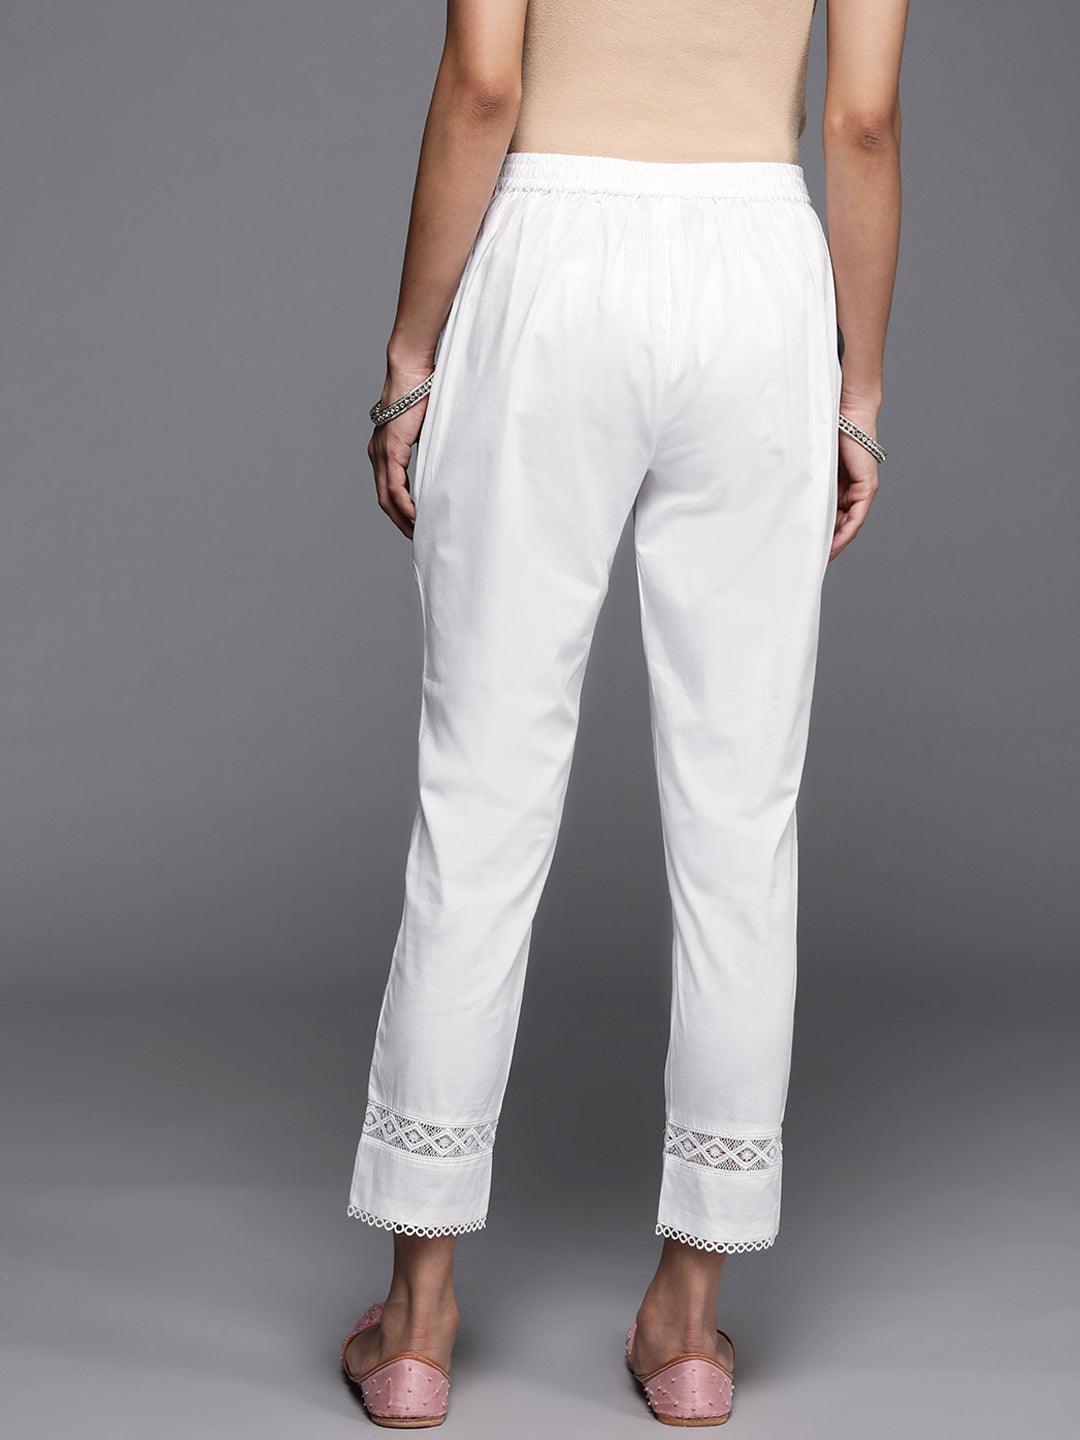 Off White Solid Cotton Trousers